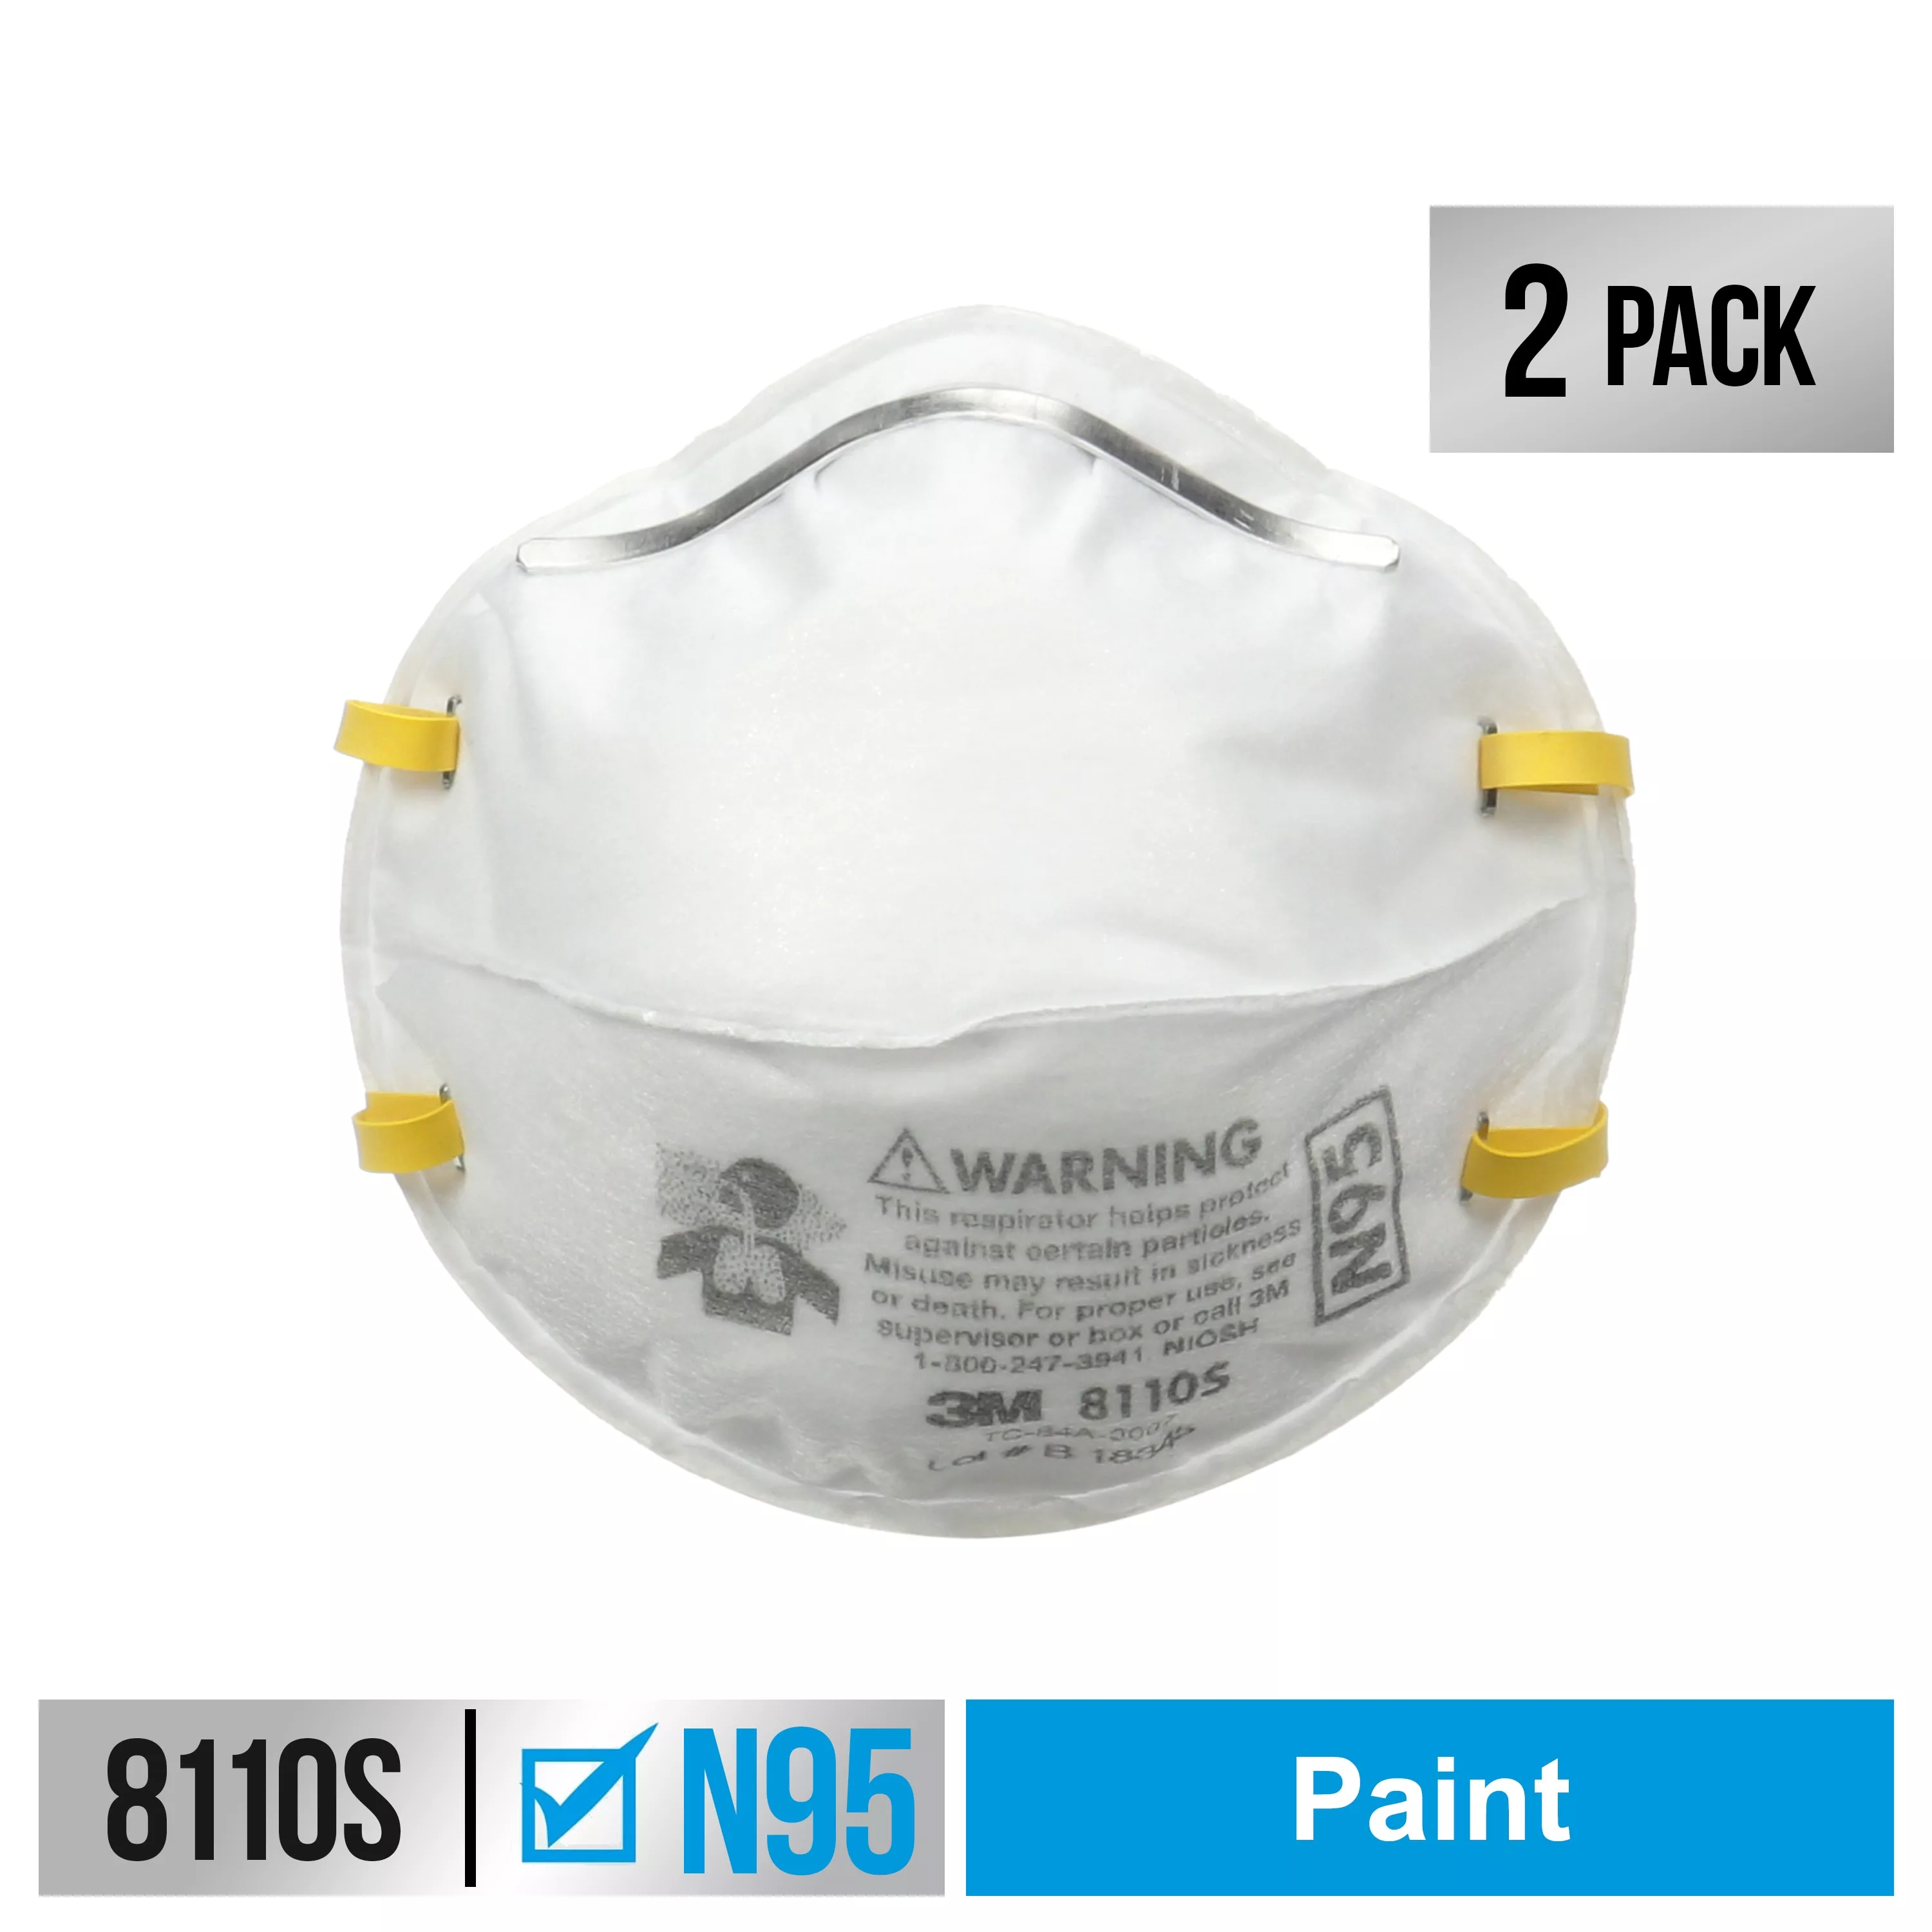 3M™ Performance Paint Prep Respirator N95 Particulate, 8110SP2-DC, Size
Small, 2 eaches/pack, 12 packs/case